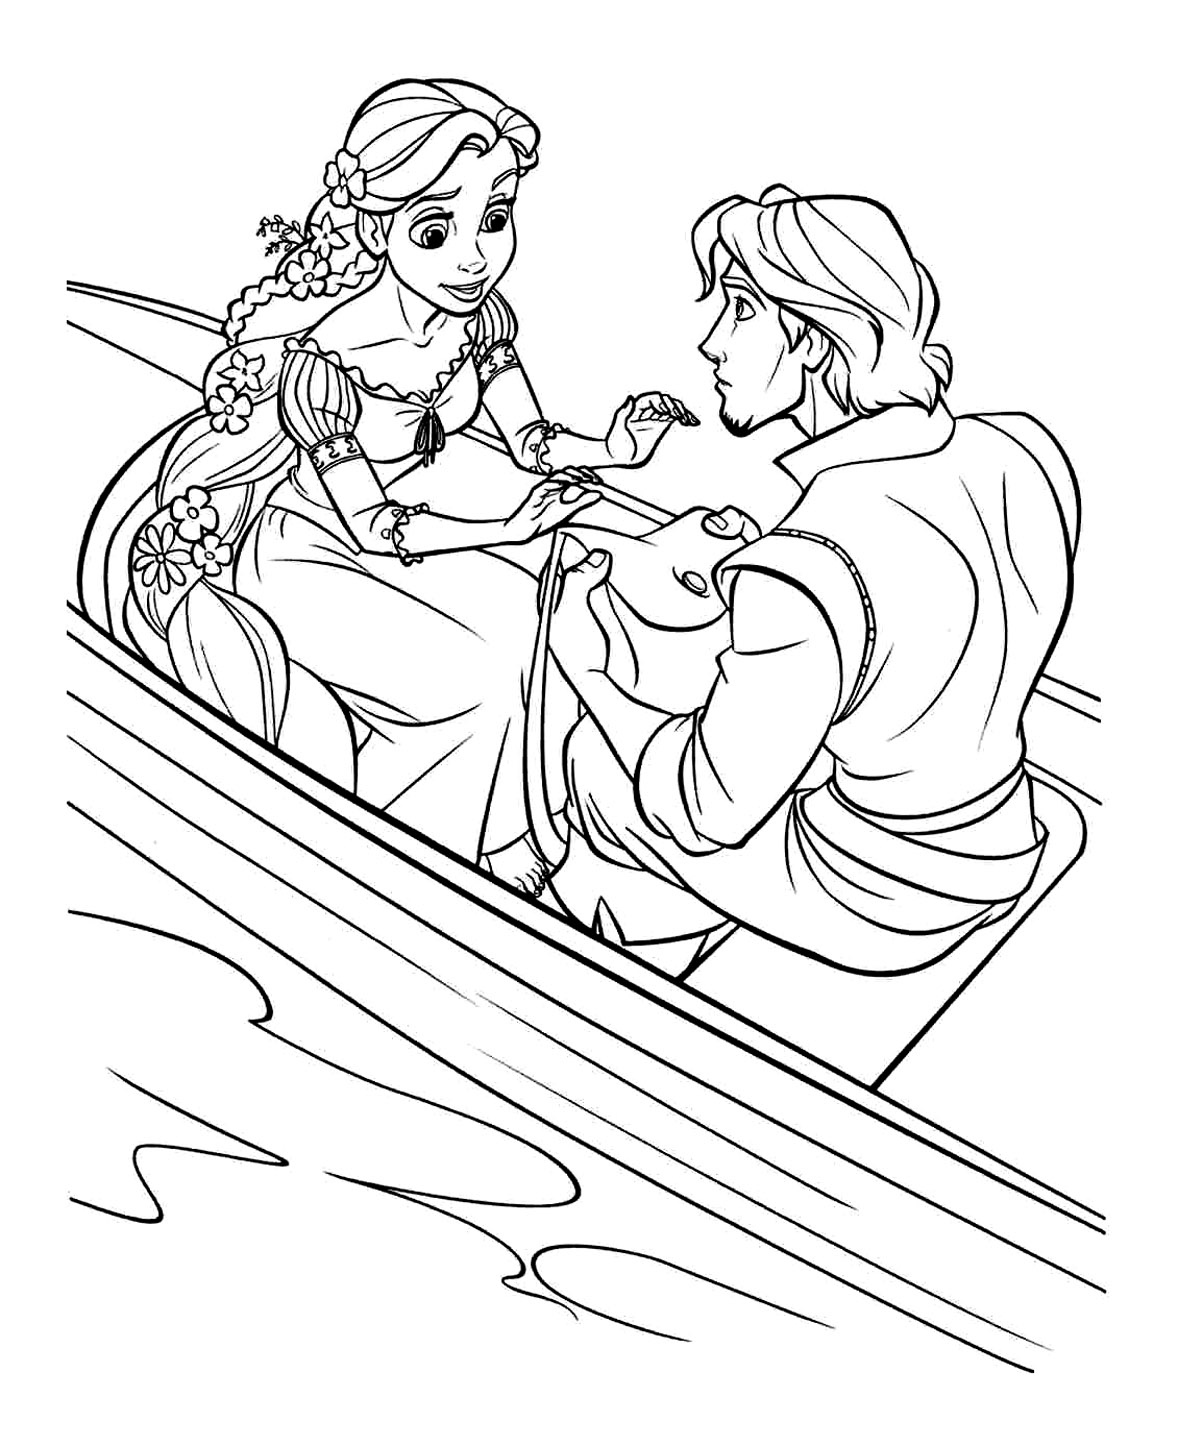 Flynn gives his bag to Rapunzel Coloring Pages